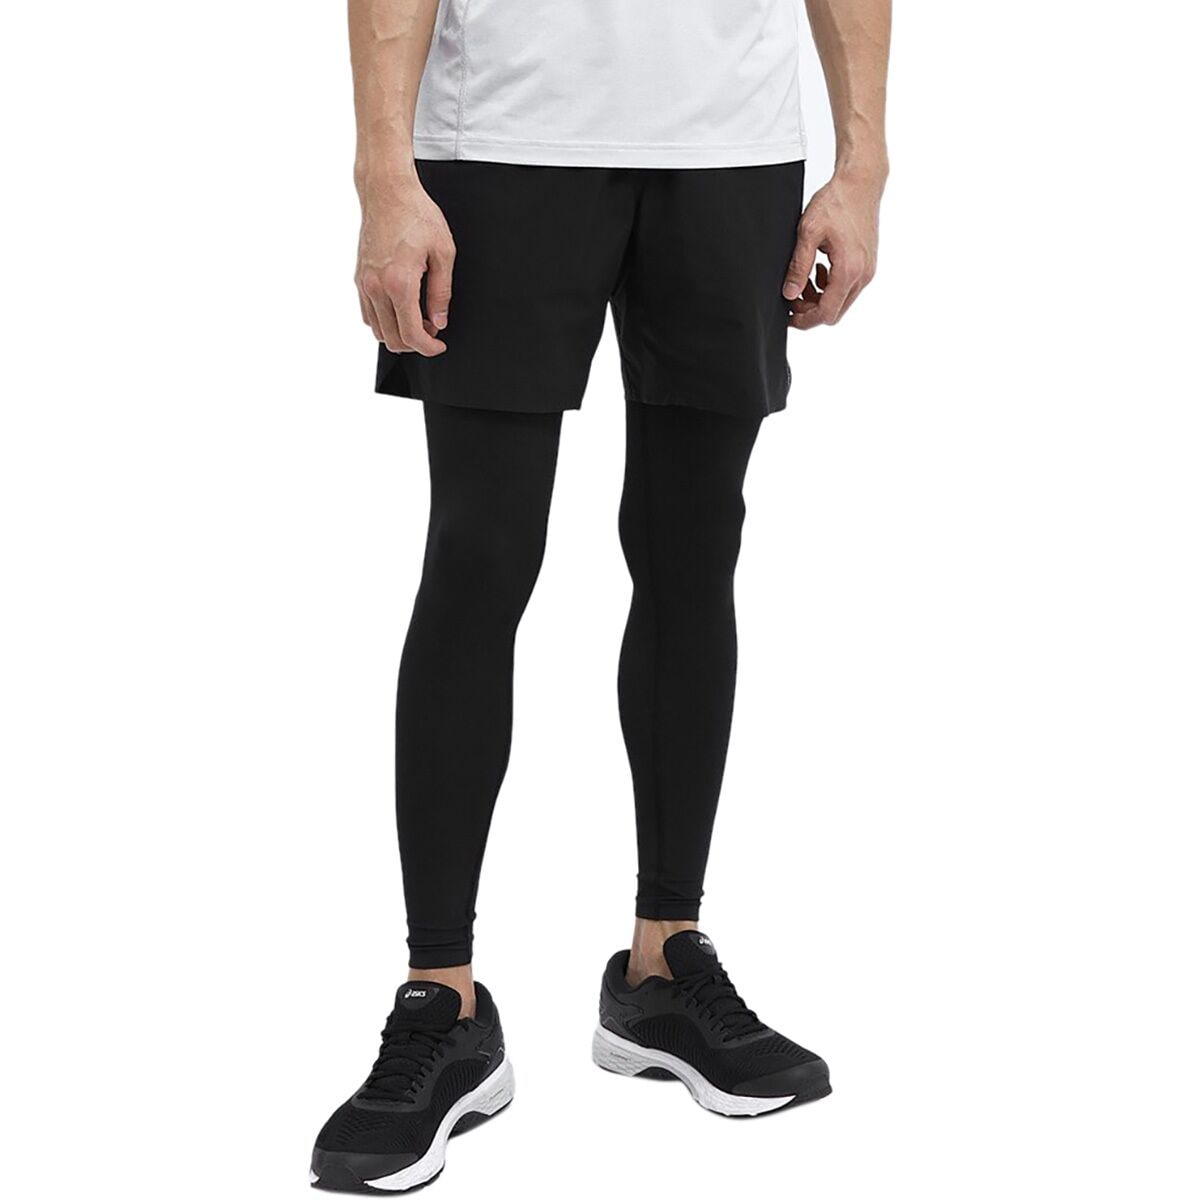 Reigning Champ Compression Tight - Men's